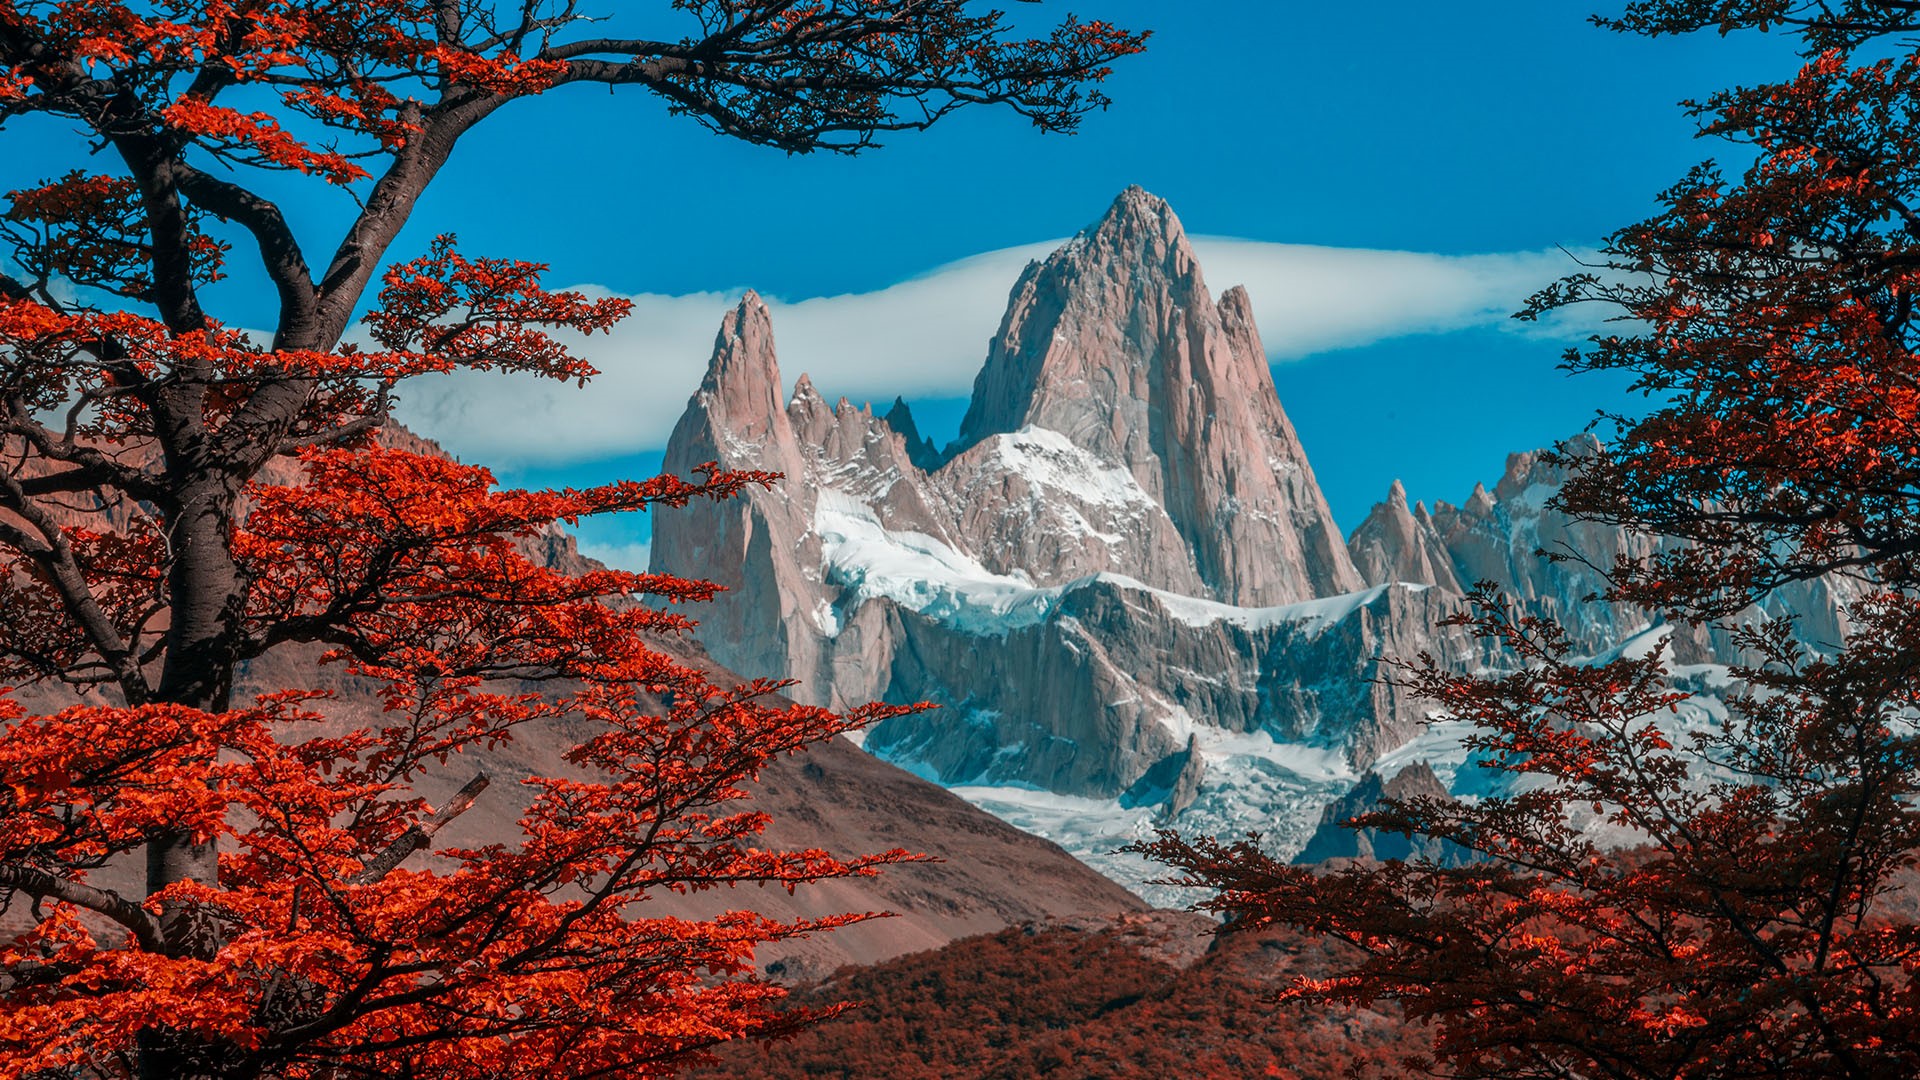 General 1920x1080 nature landscape clouds sky trees forest fall snowy mountain Monte Fitz Roy Patagonia Argentina